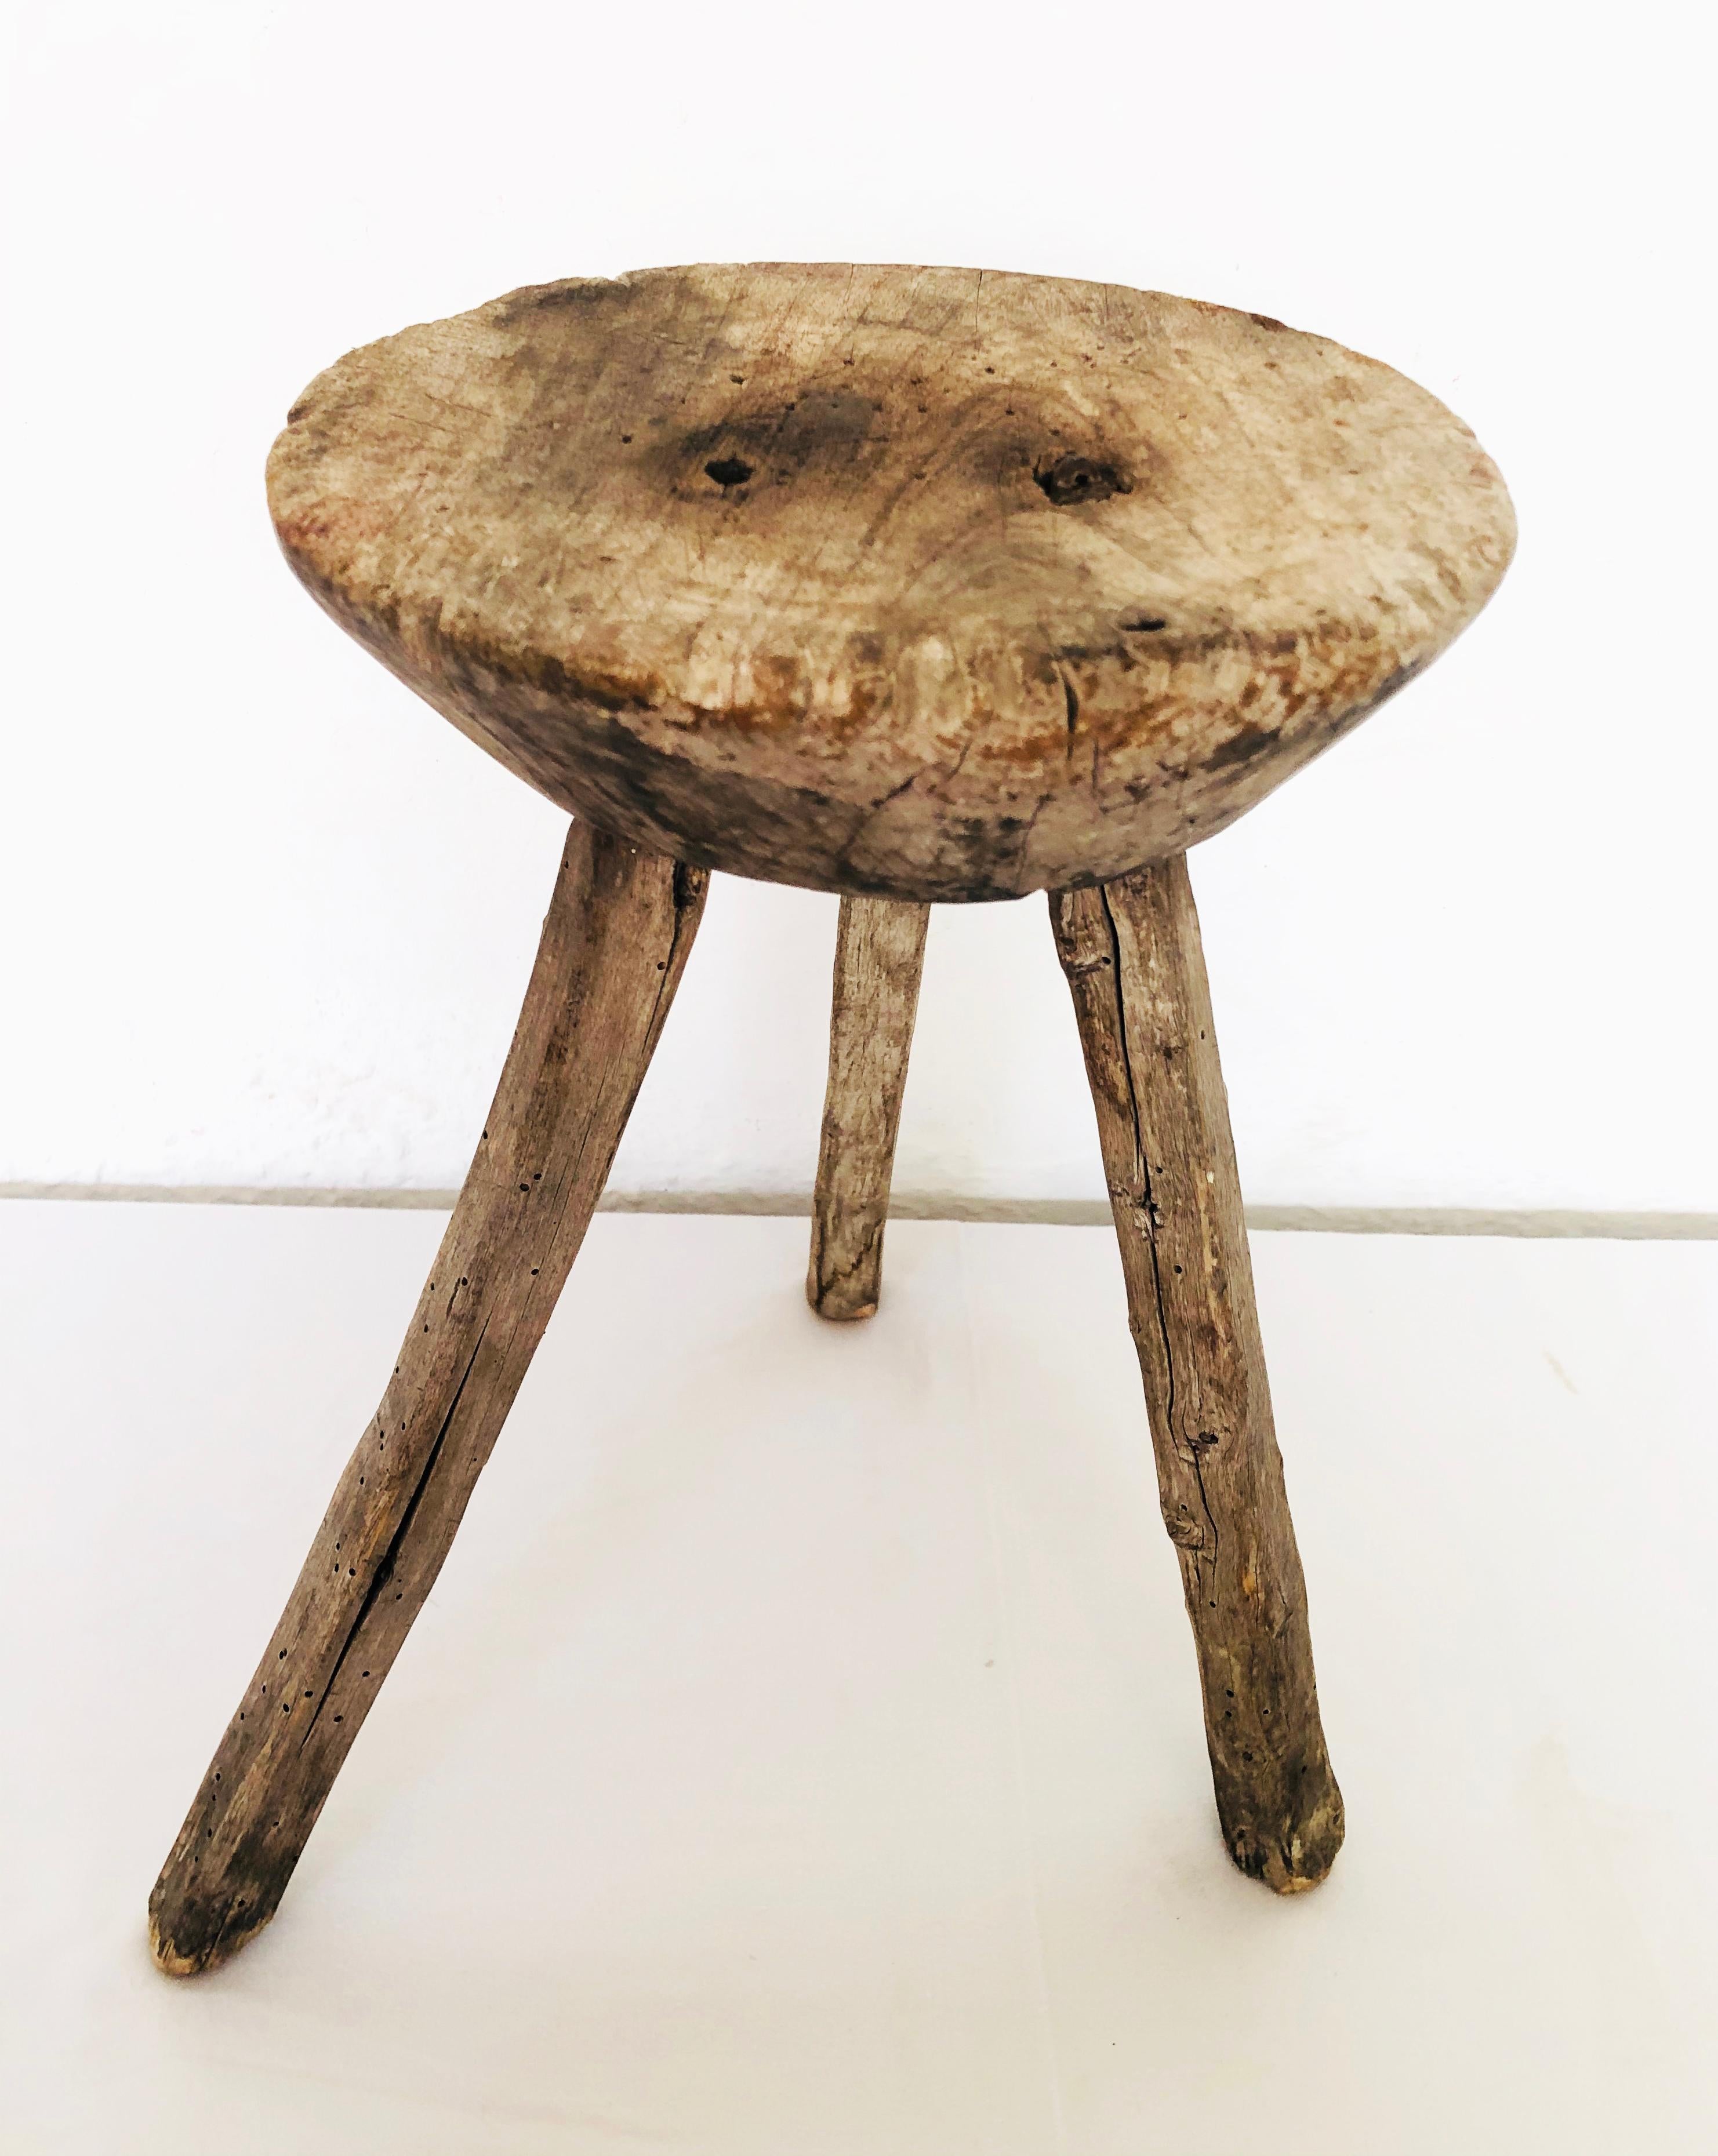 Antique natural Mezquite milking stool wood stool with thick round top found in Western Mexico.
Great for side table or next to a tub.
 